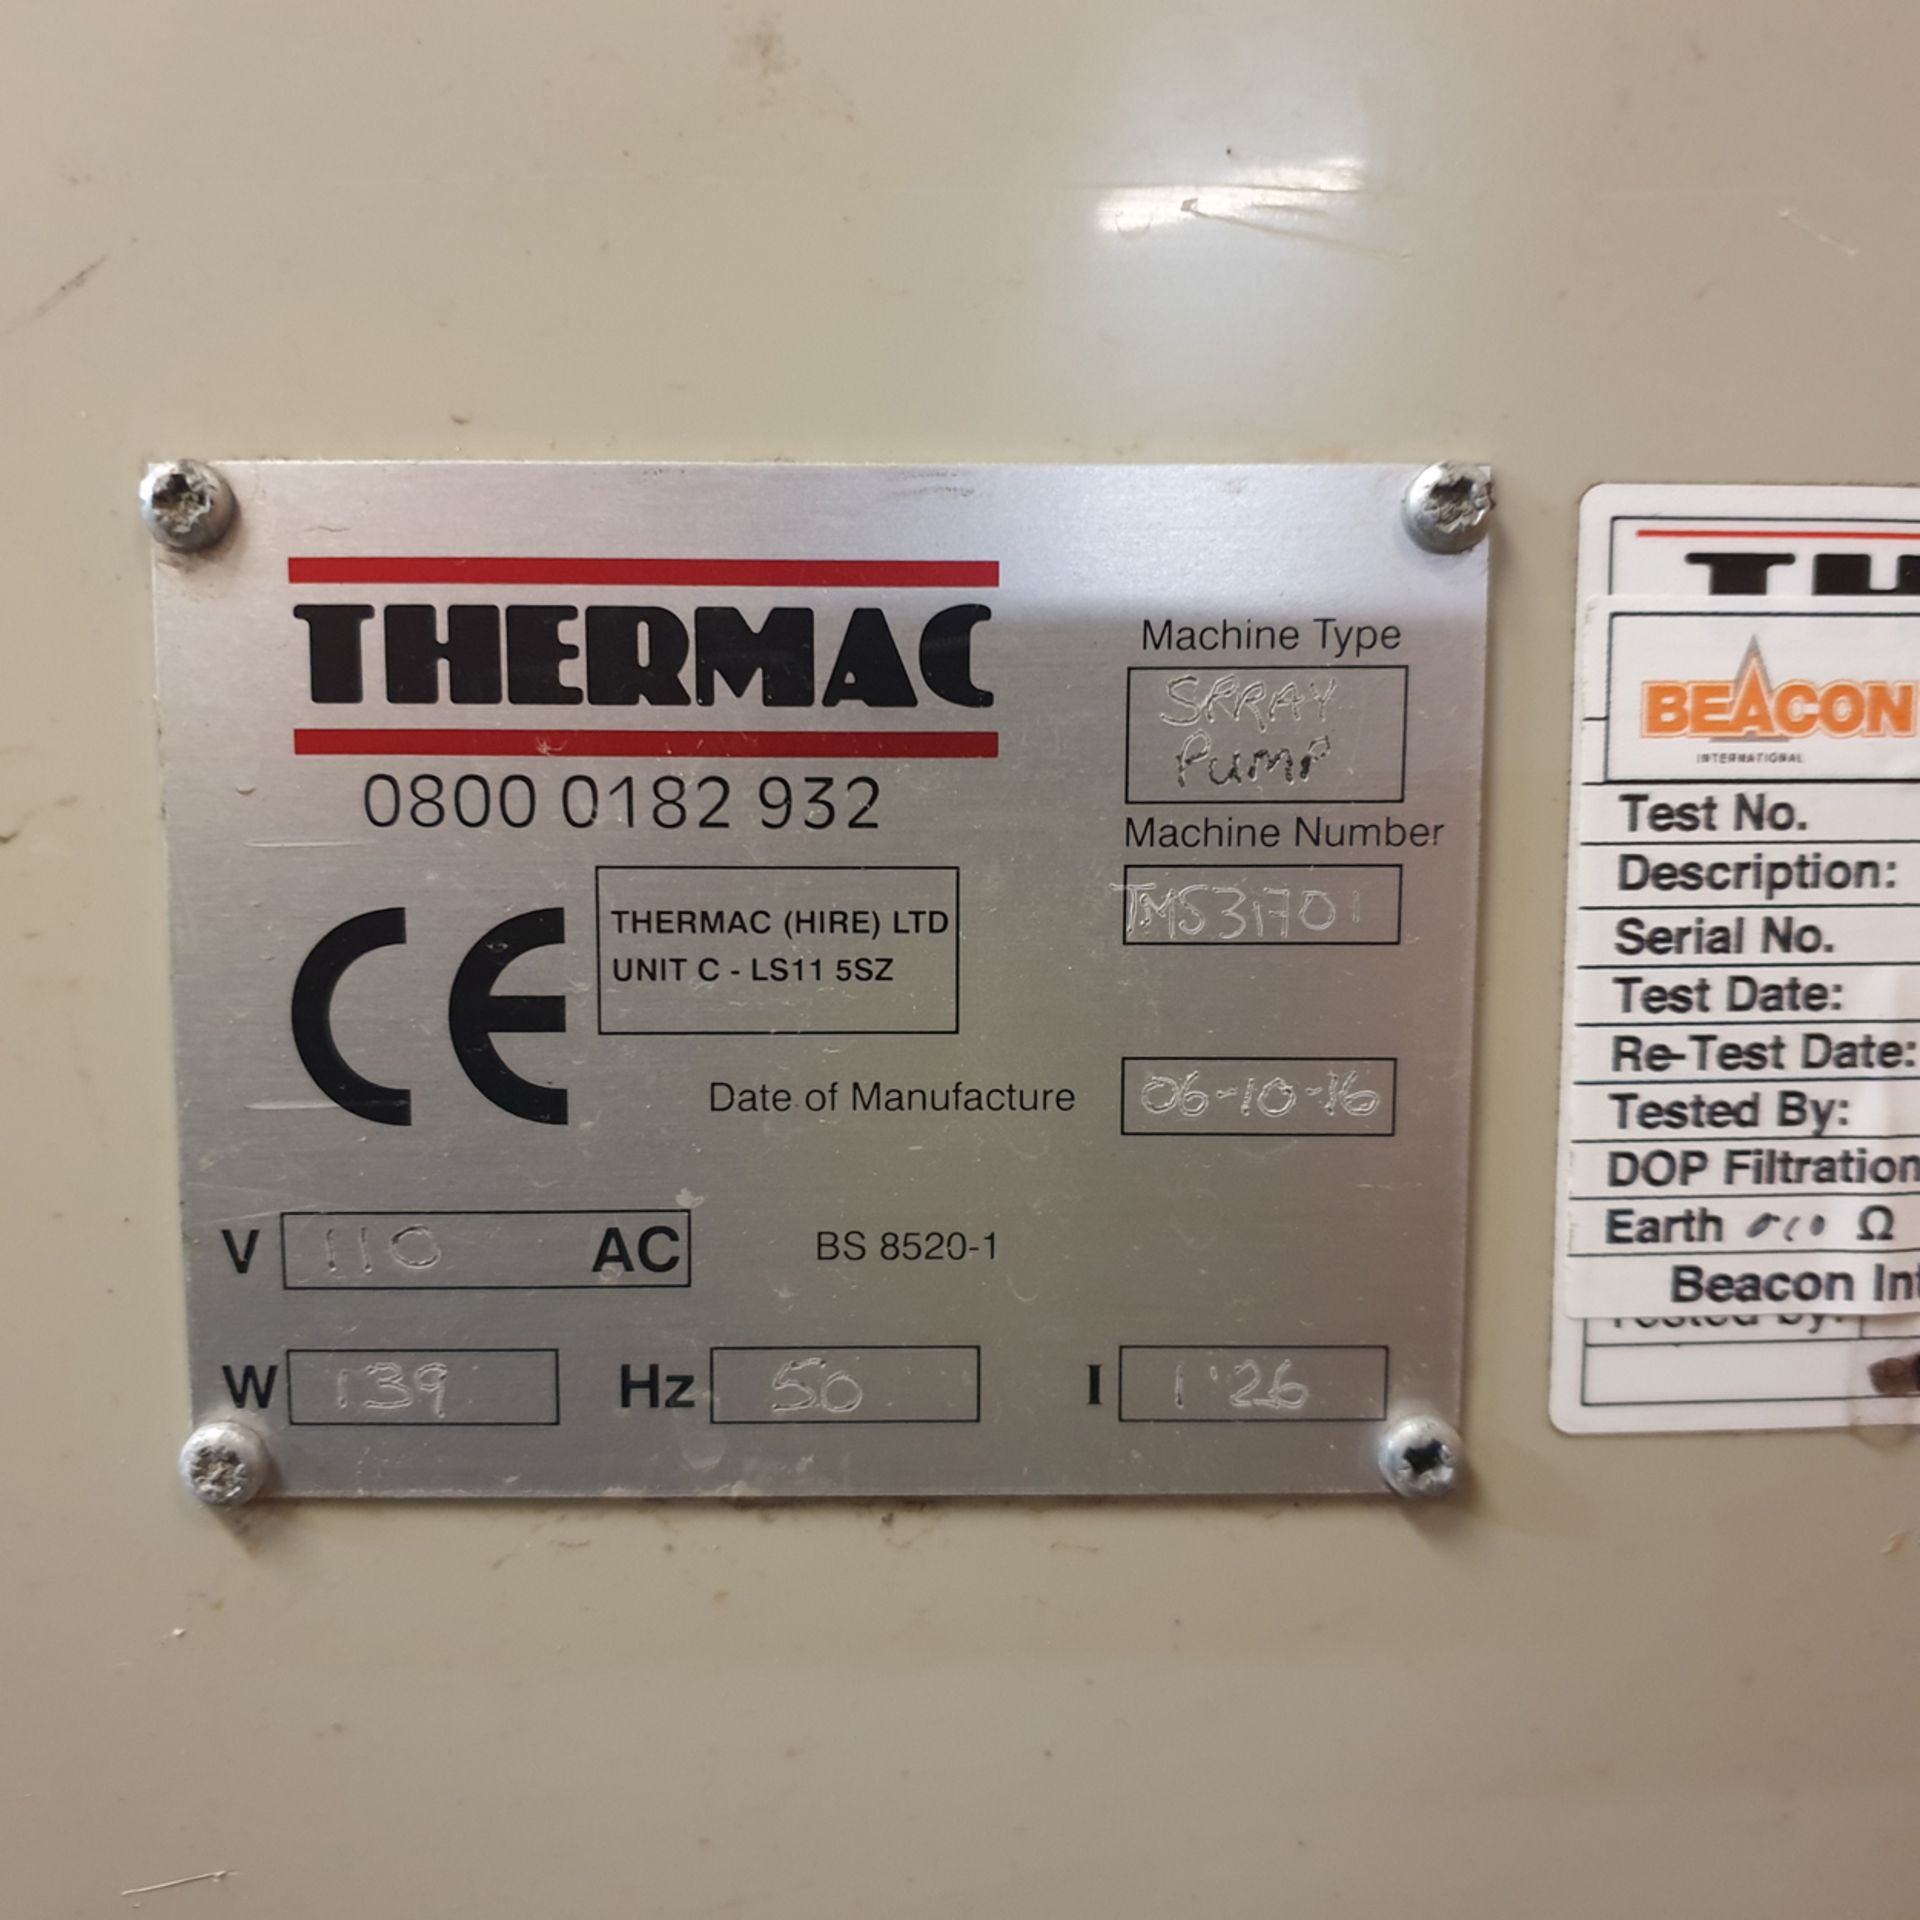 THERMAC Spray Pump. 110V. - Image 5 of 6